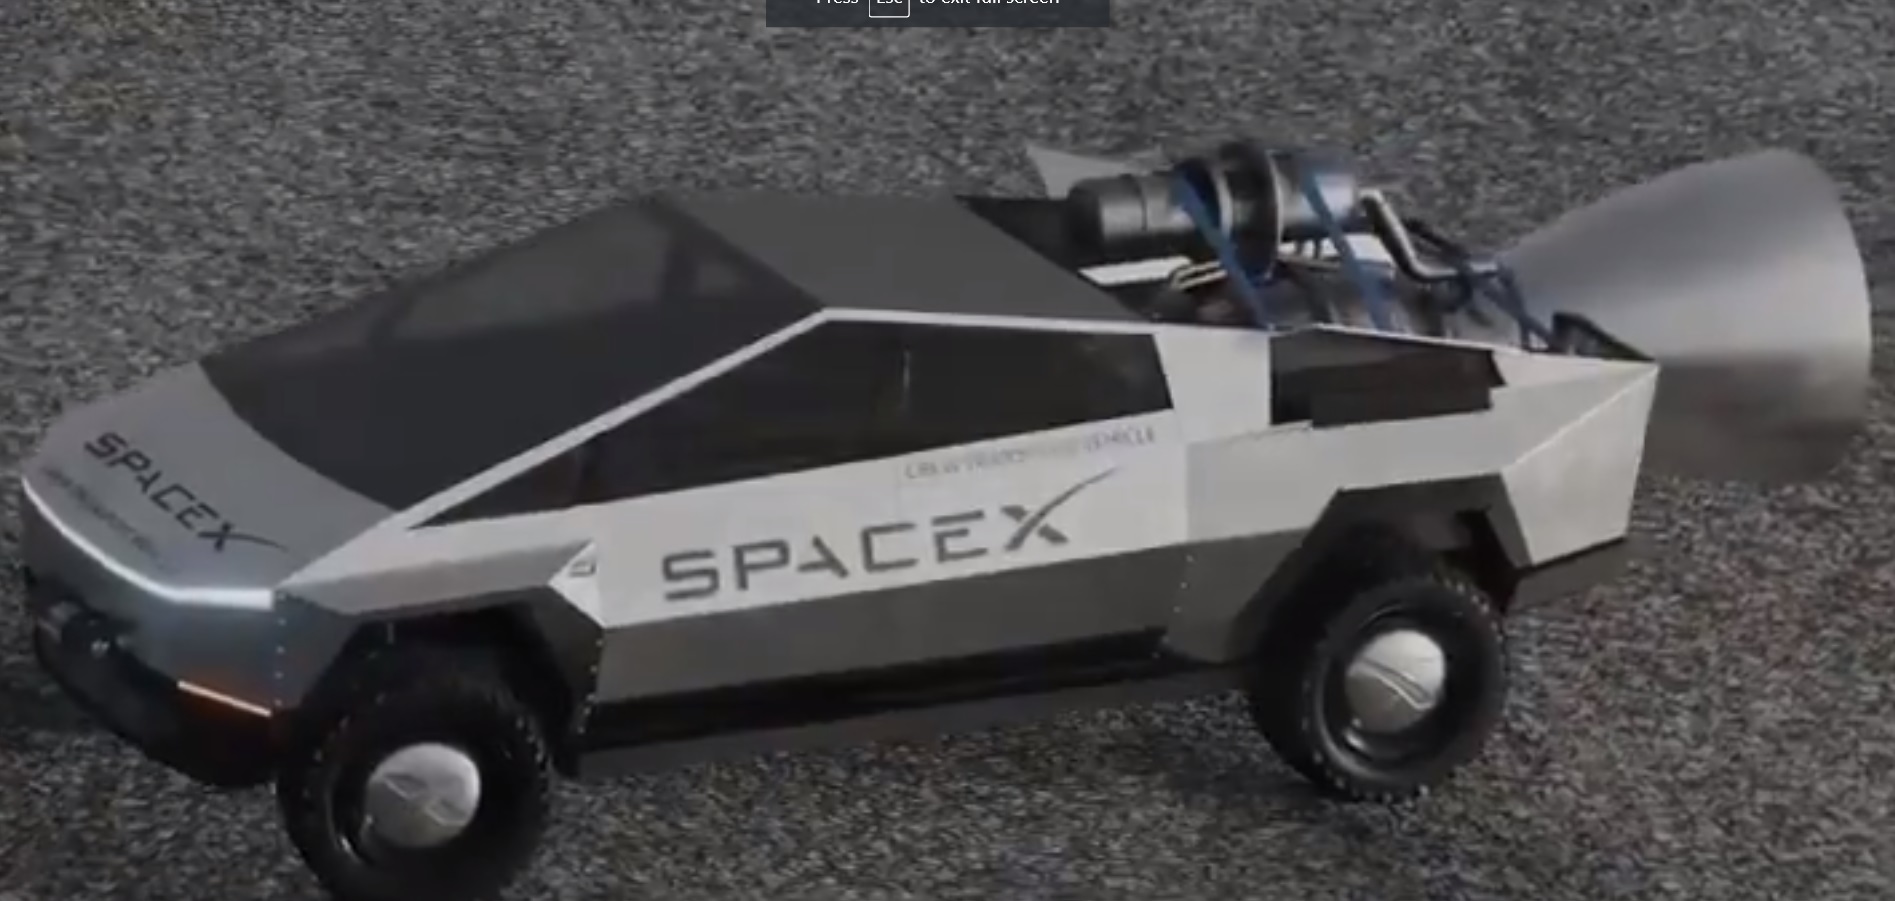 PHOTO Tesla Cybertruck SpaceX Edition With Giant Rocket Attached To The Back